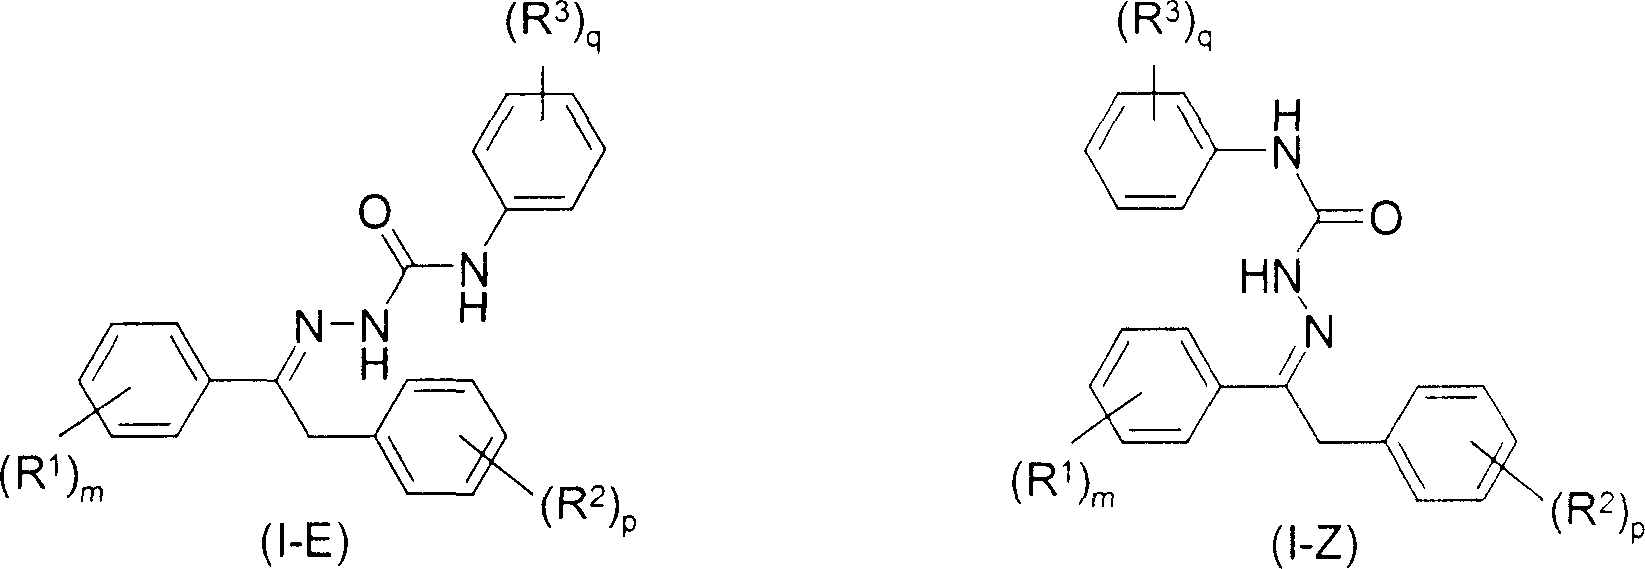 Cis-trans isomerisation of semicarbazone compounds